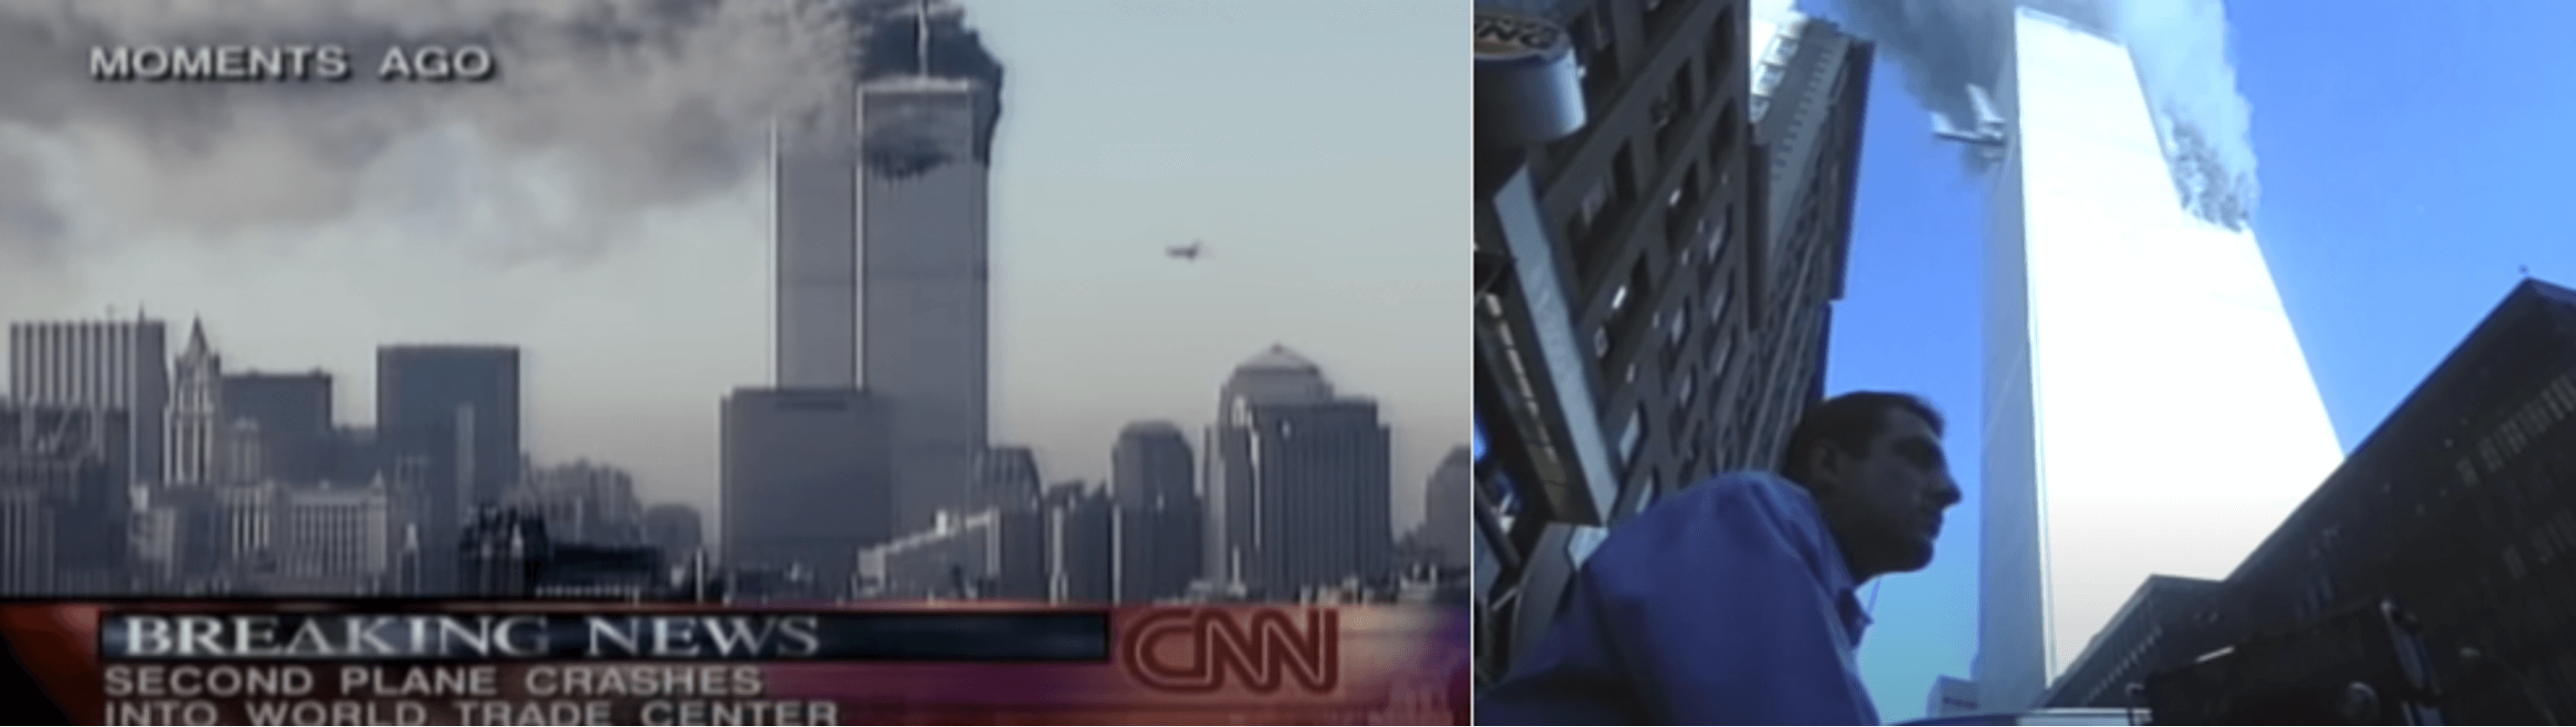 Altered videos falsely claim to show no planes hitting any buildings in the  9/11 incident – HKBU Fact Check